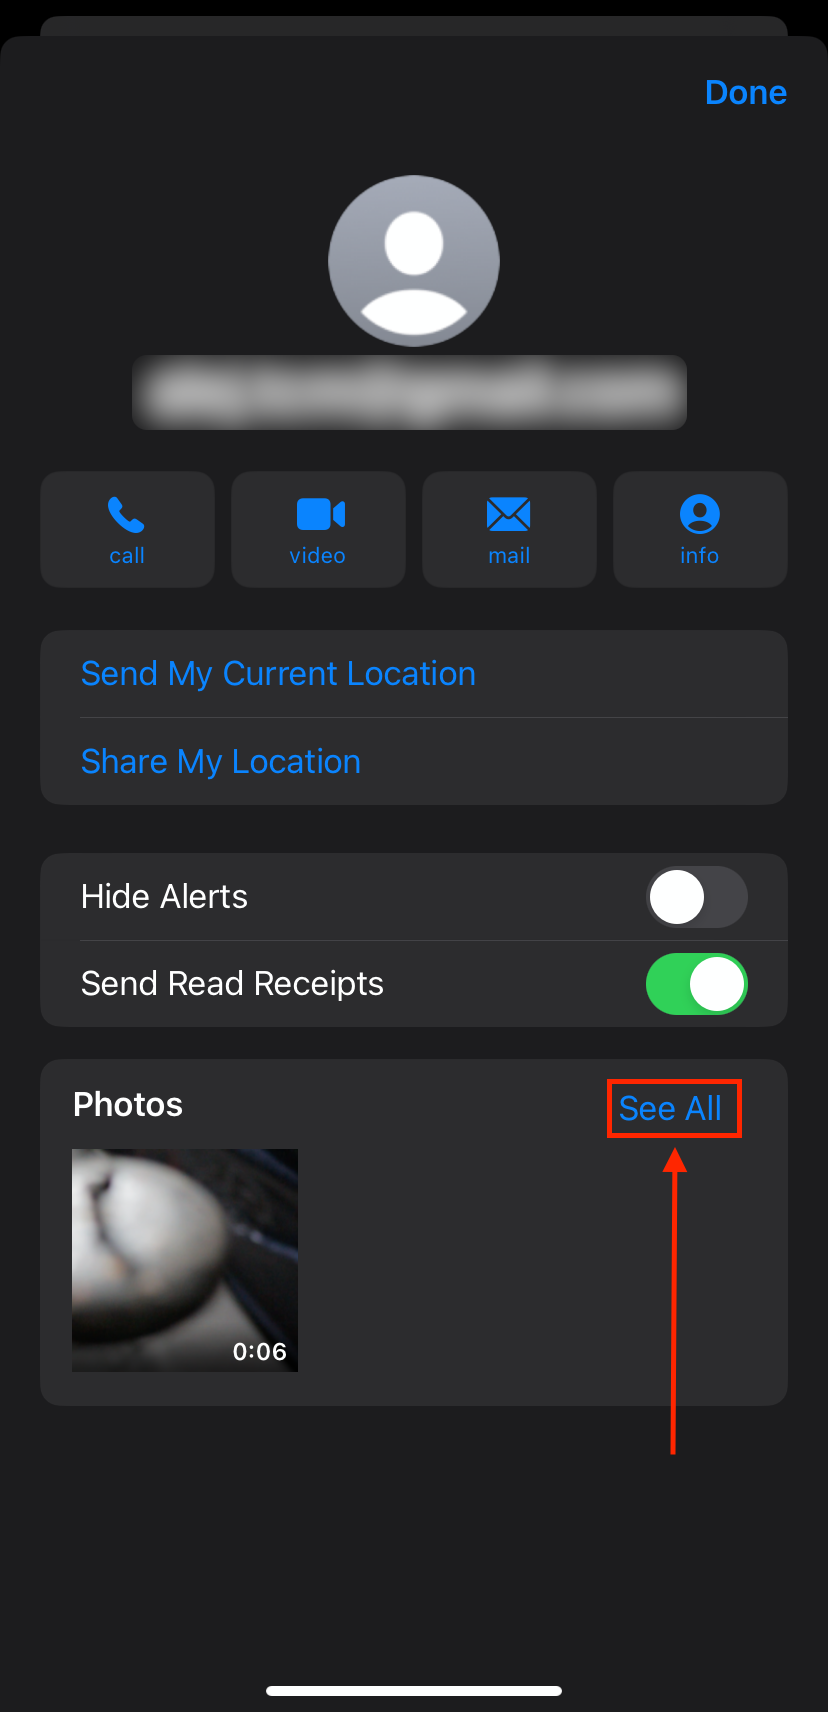 See All button for media in Messages